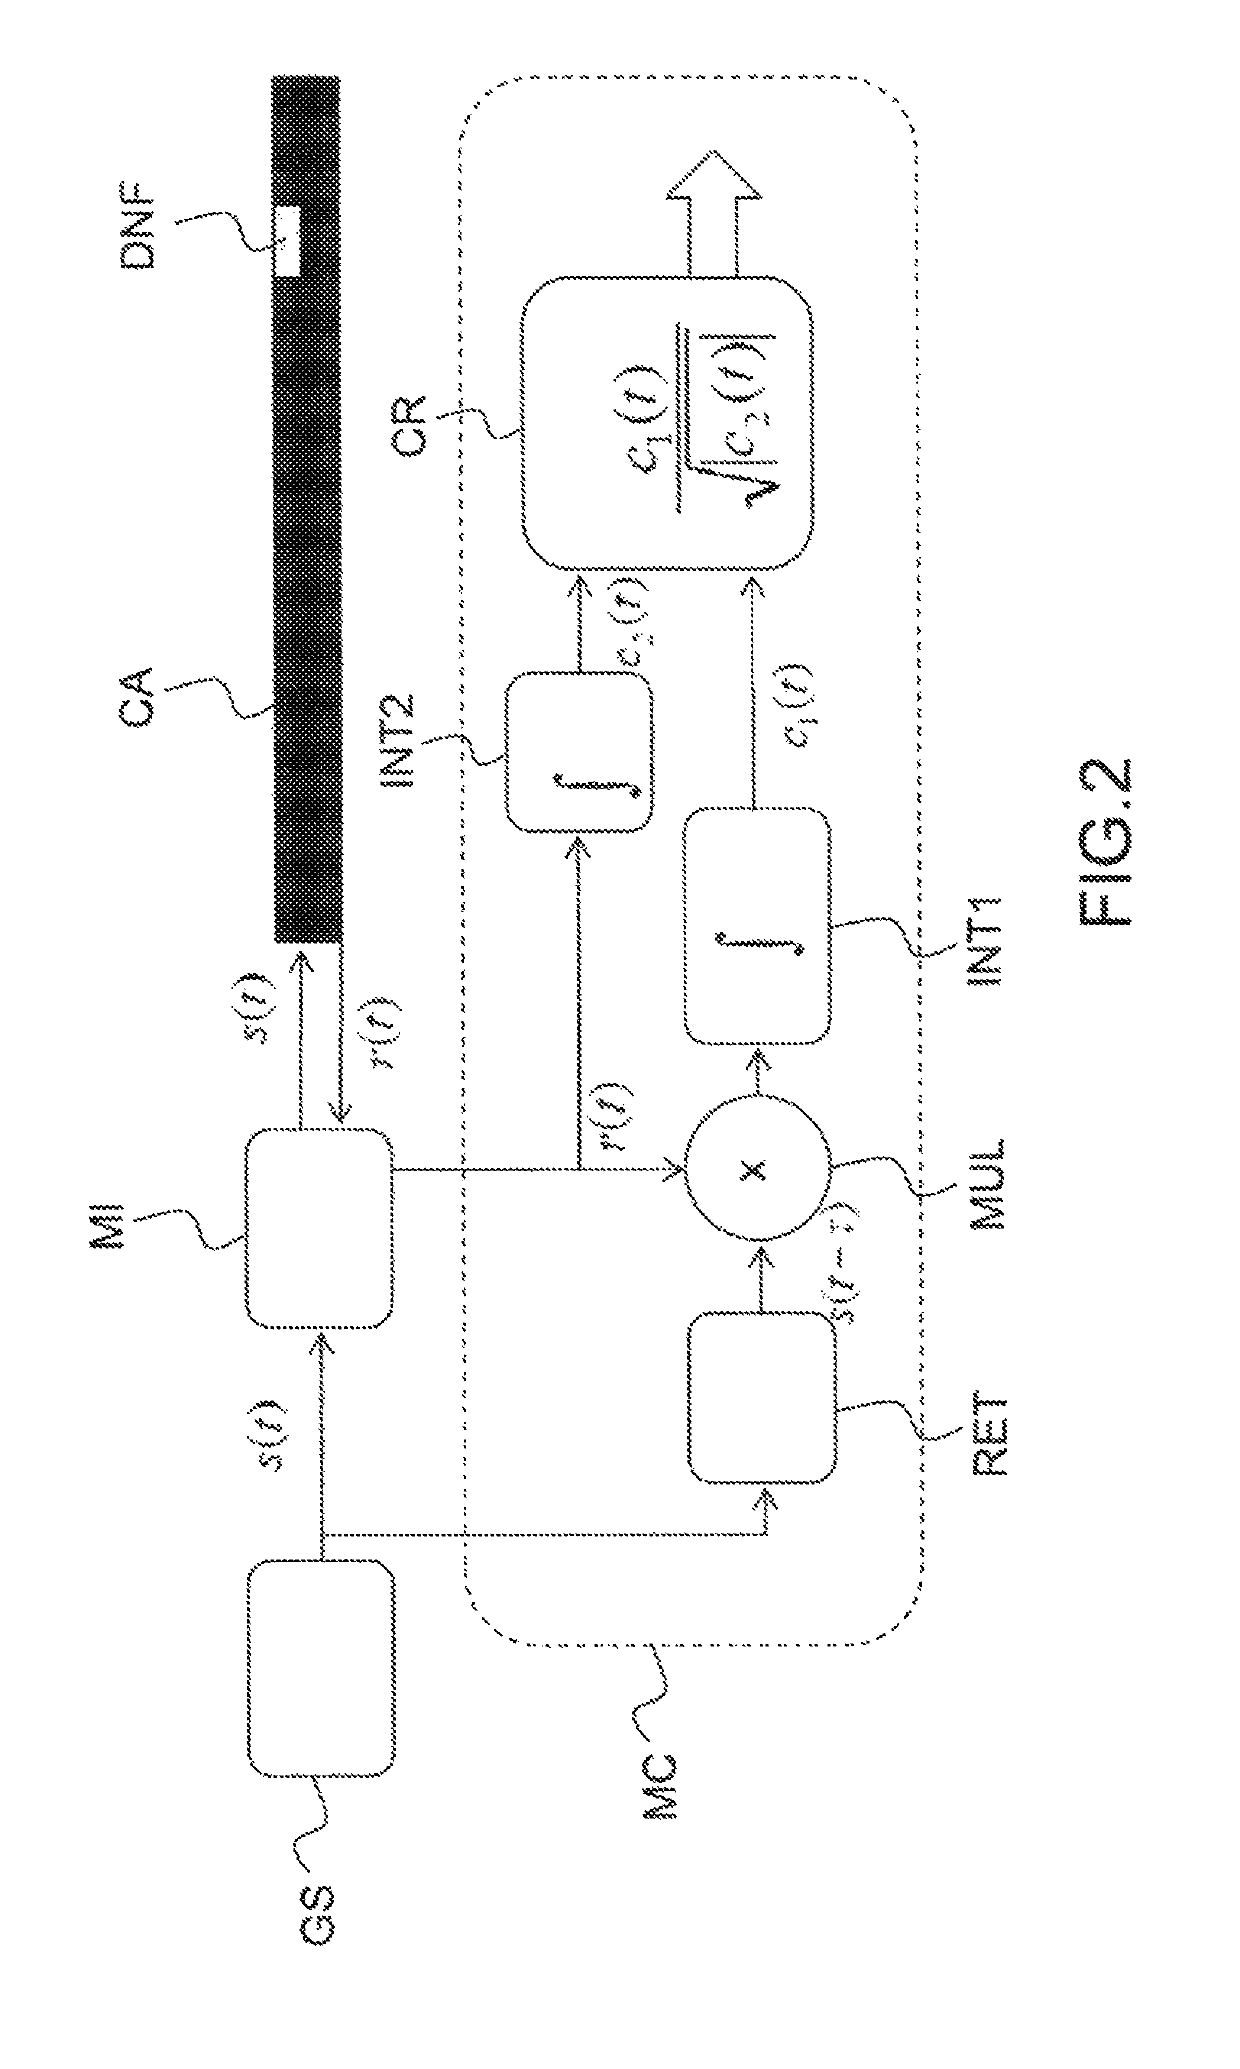 Method of analyzing a cable, based on an auto-adaptive correlation, for the detection of soft defects